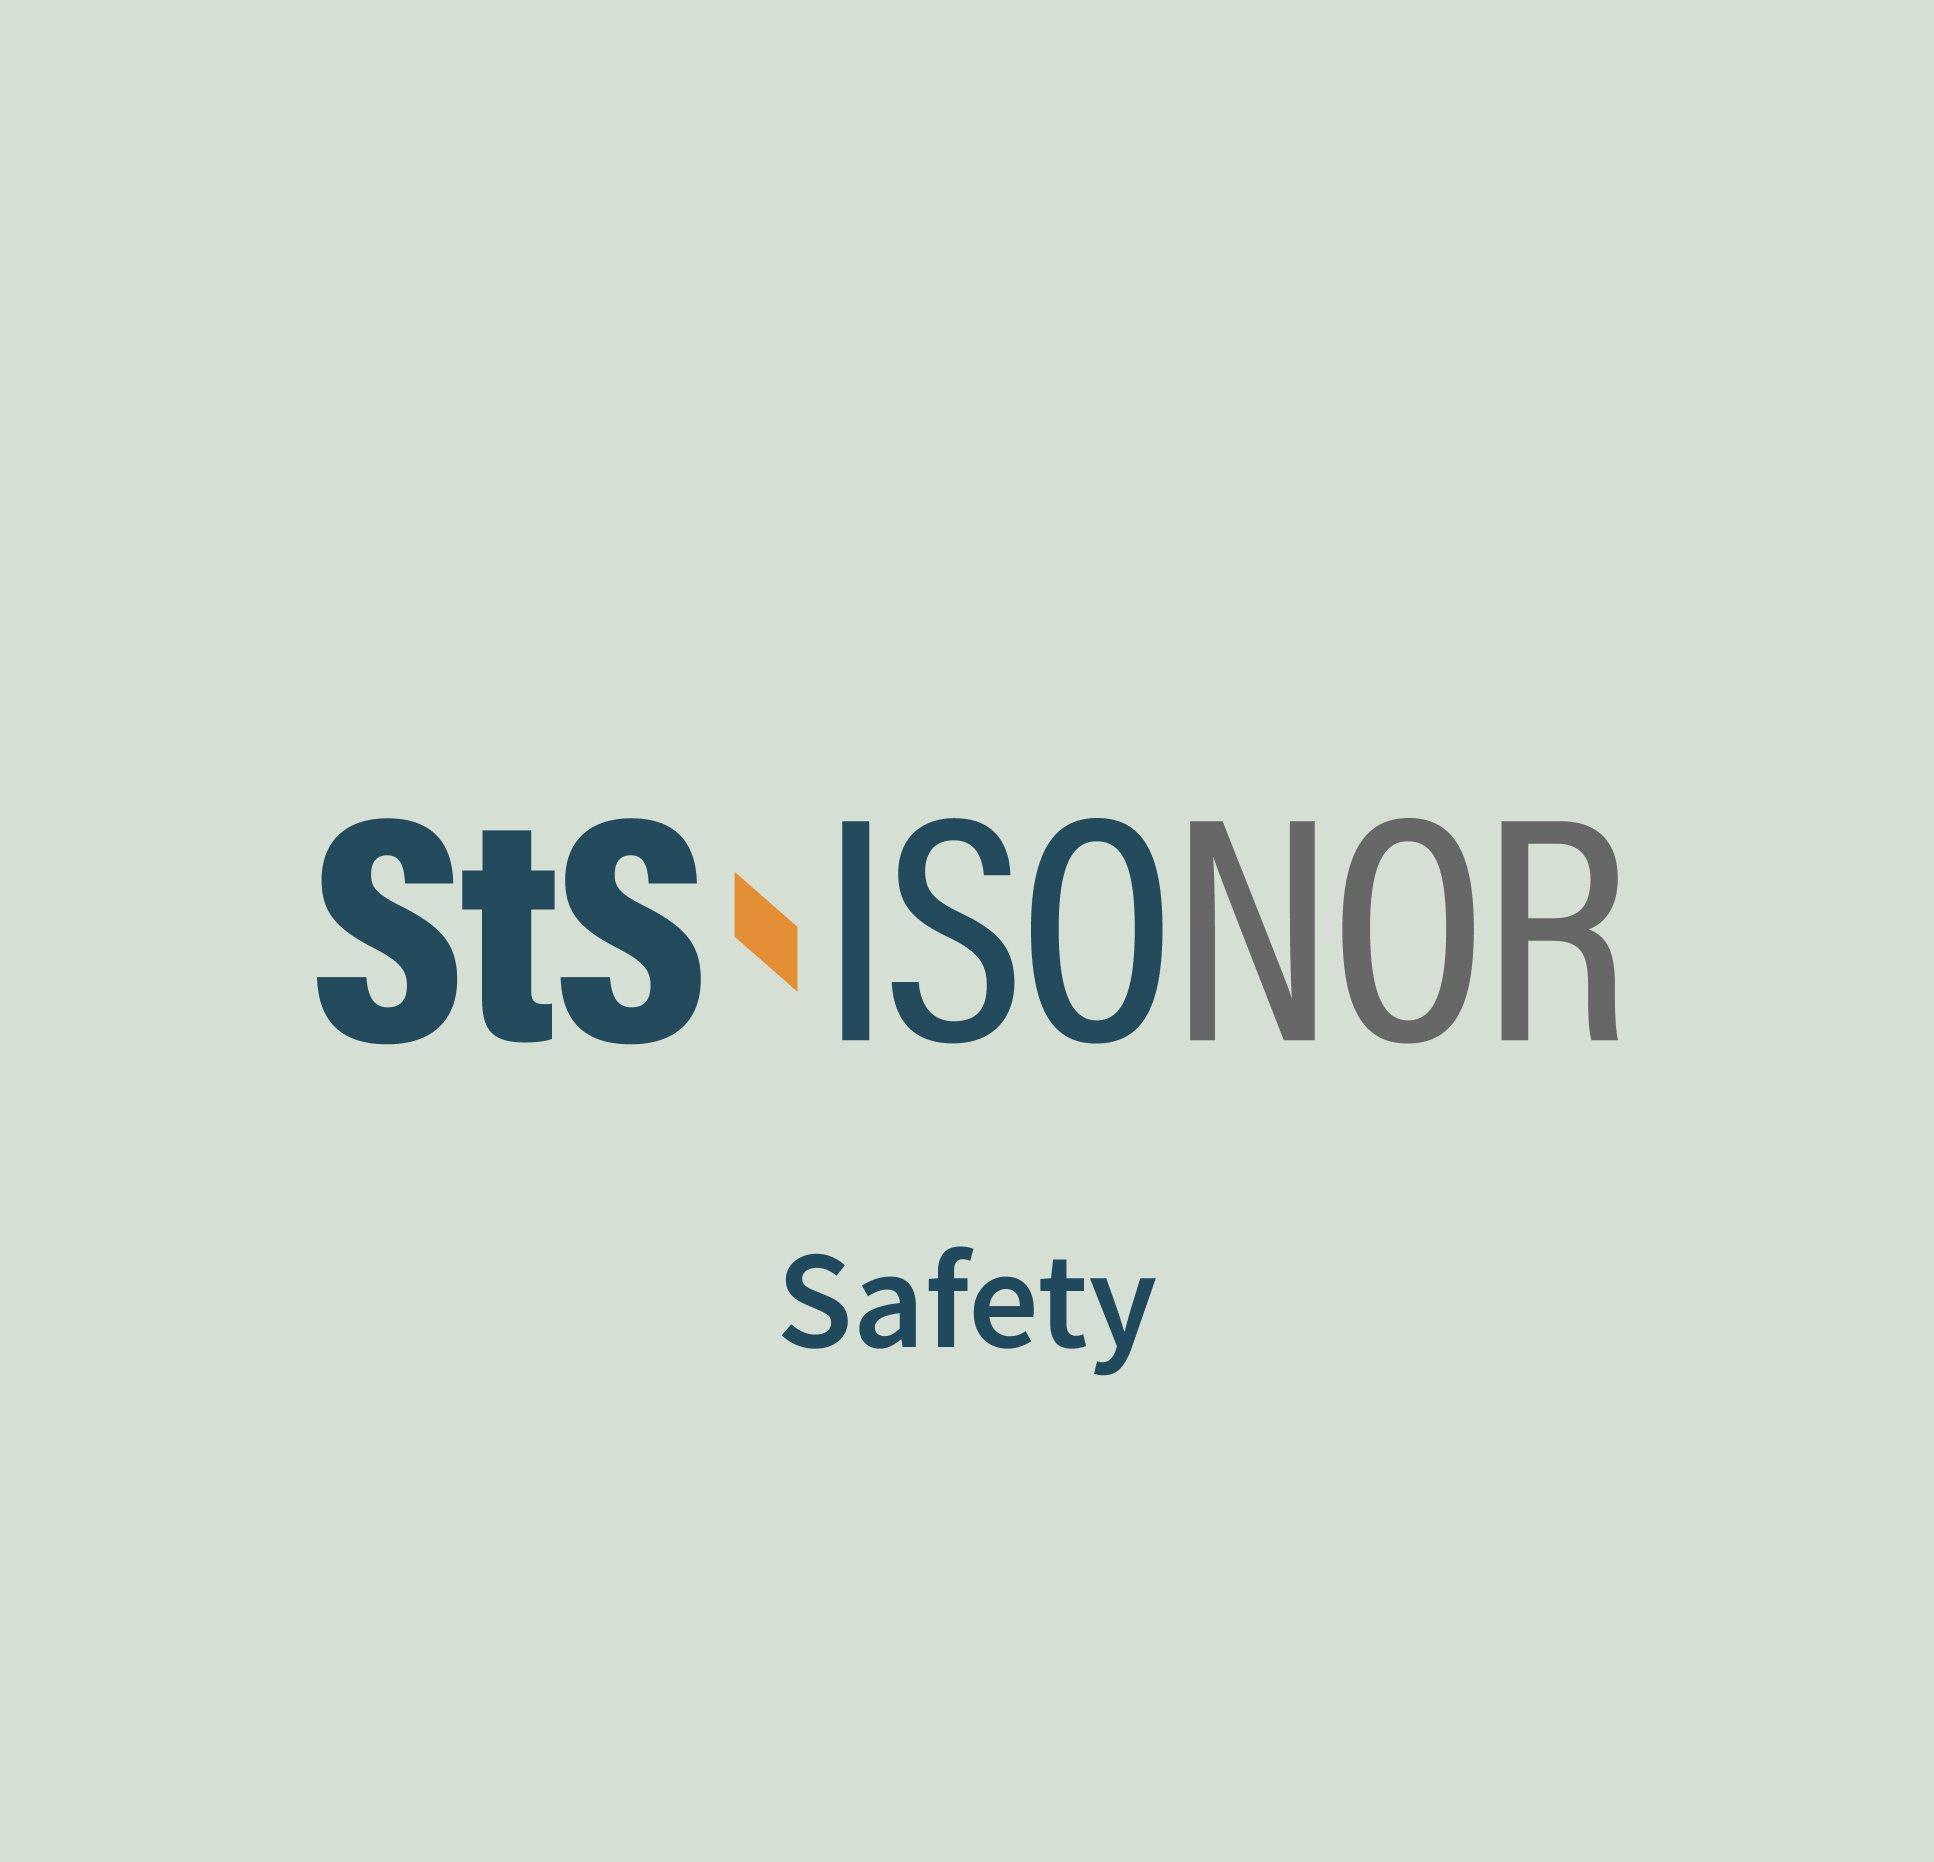 Logo and safety cover